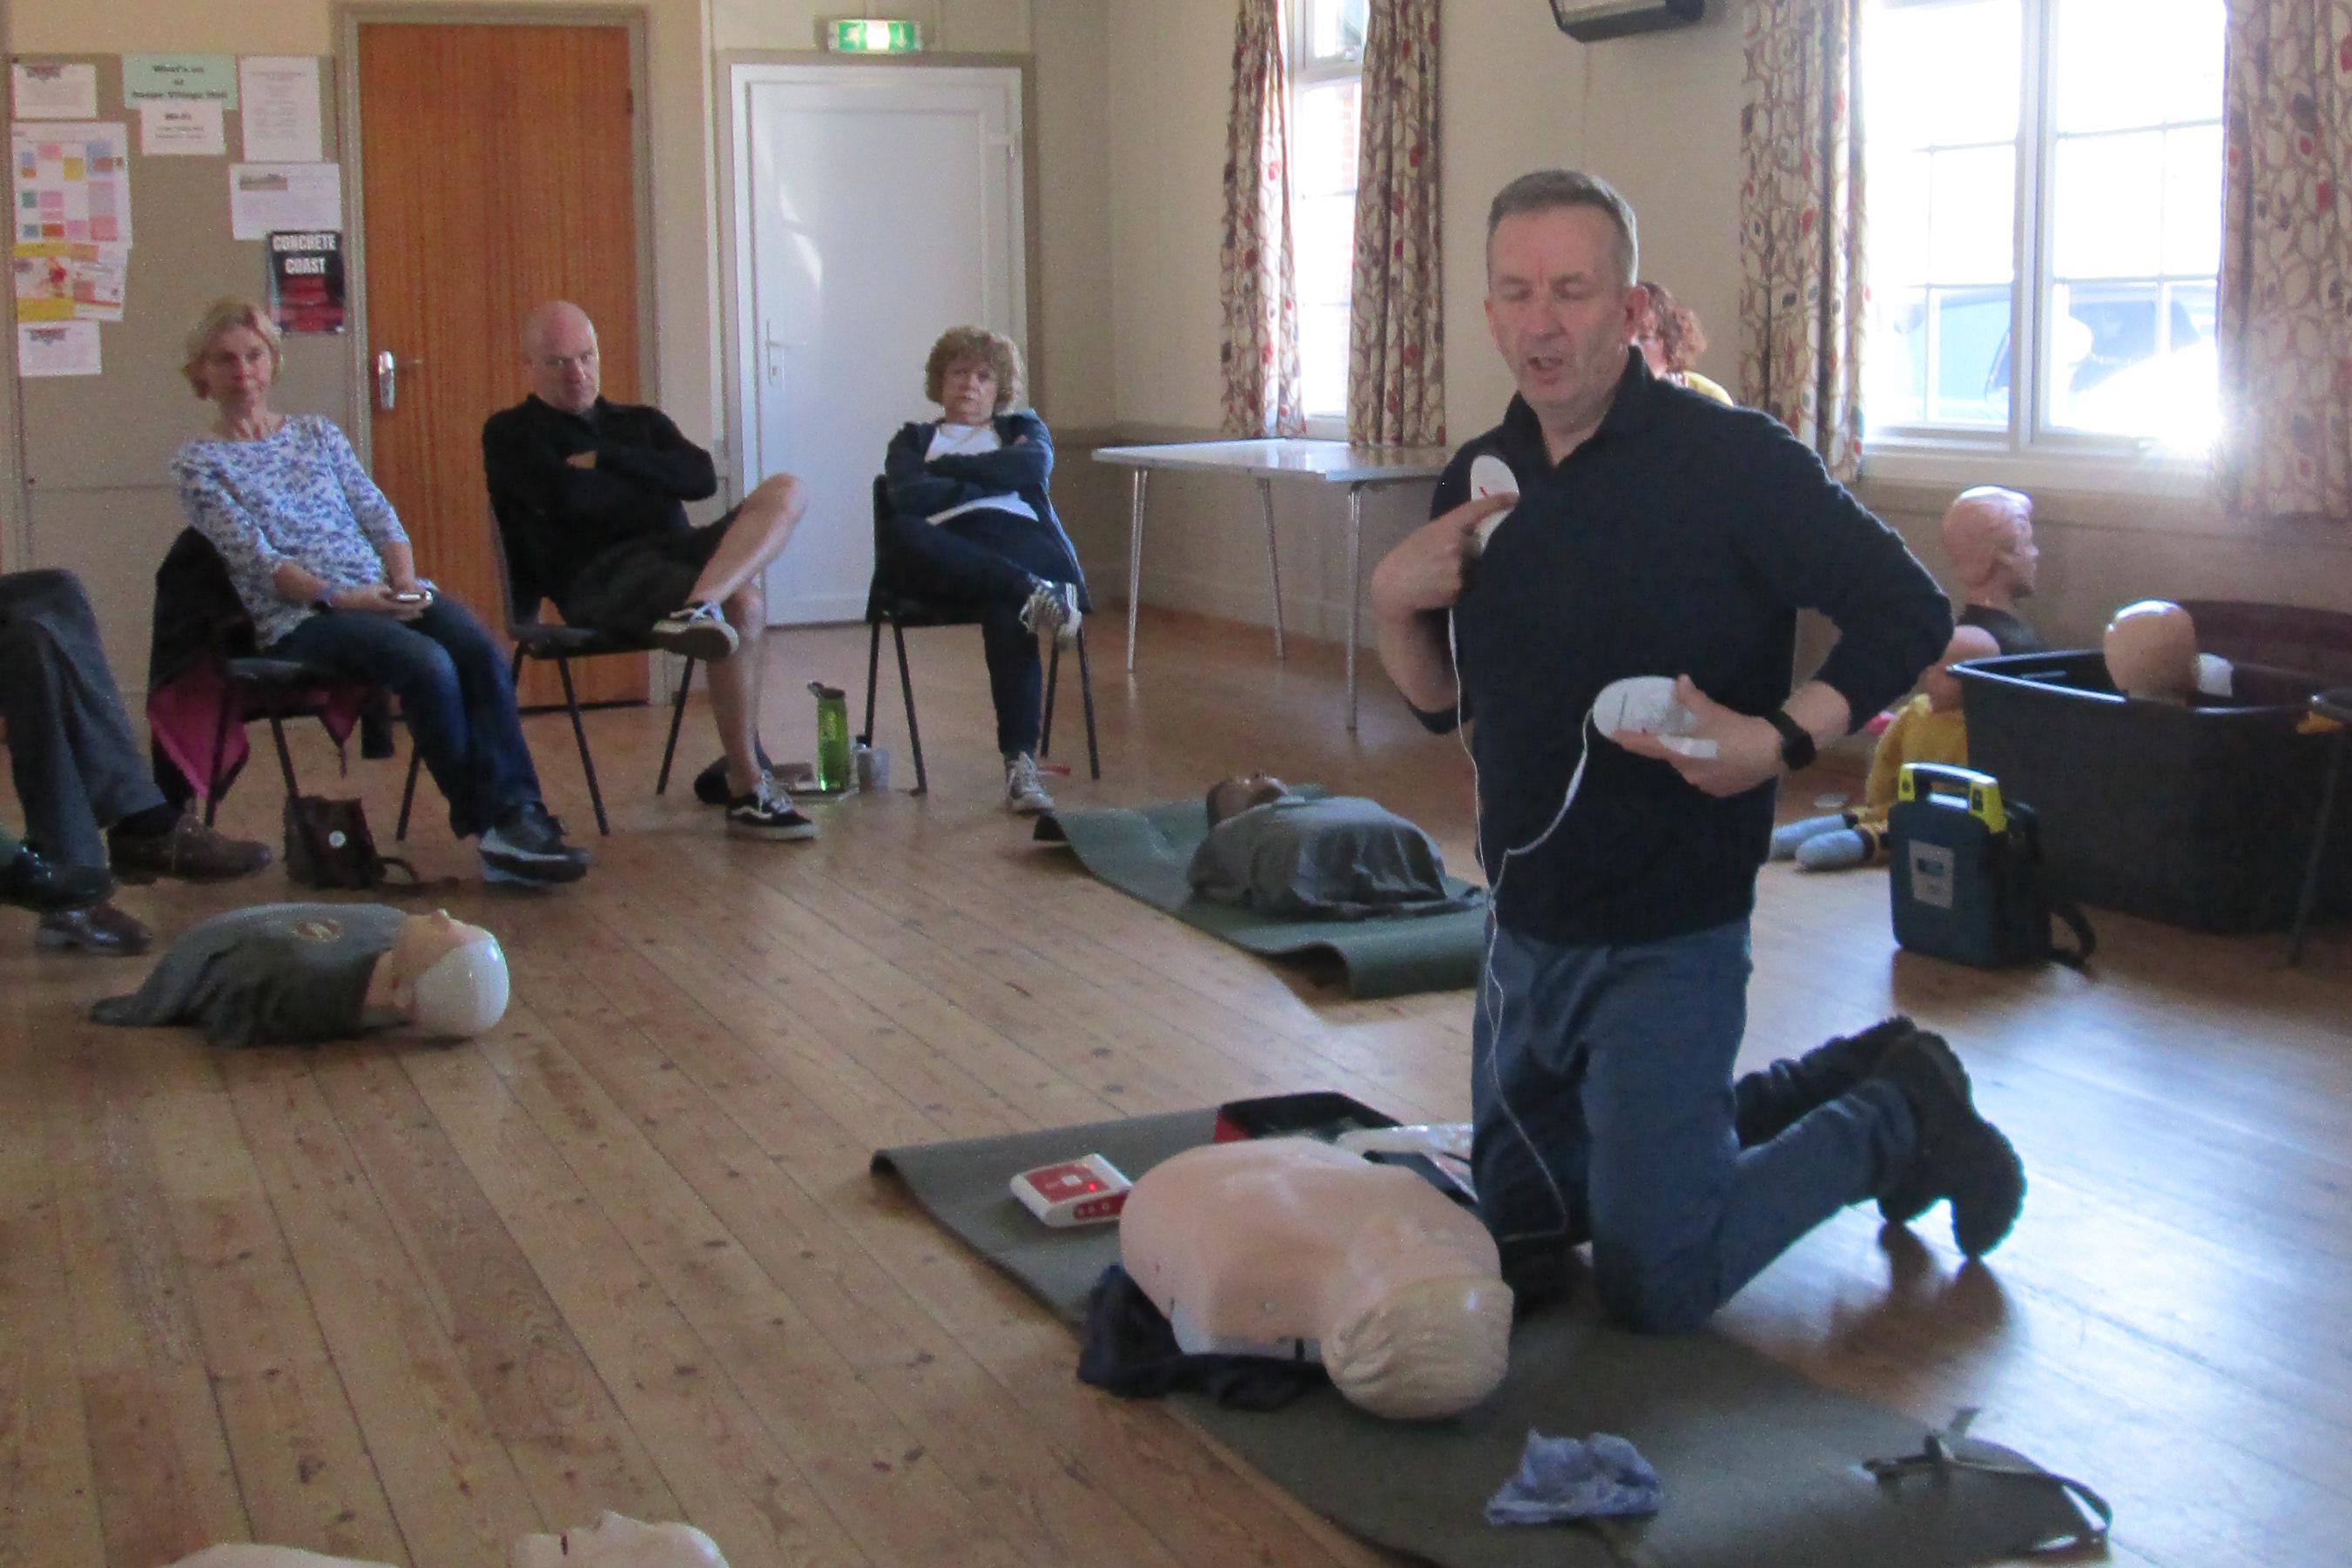 First Aid training, Saturday morning